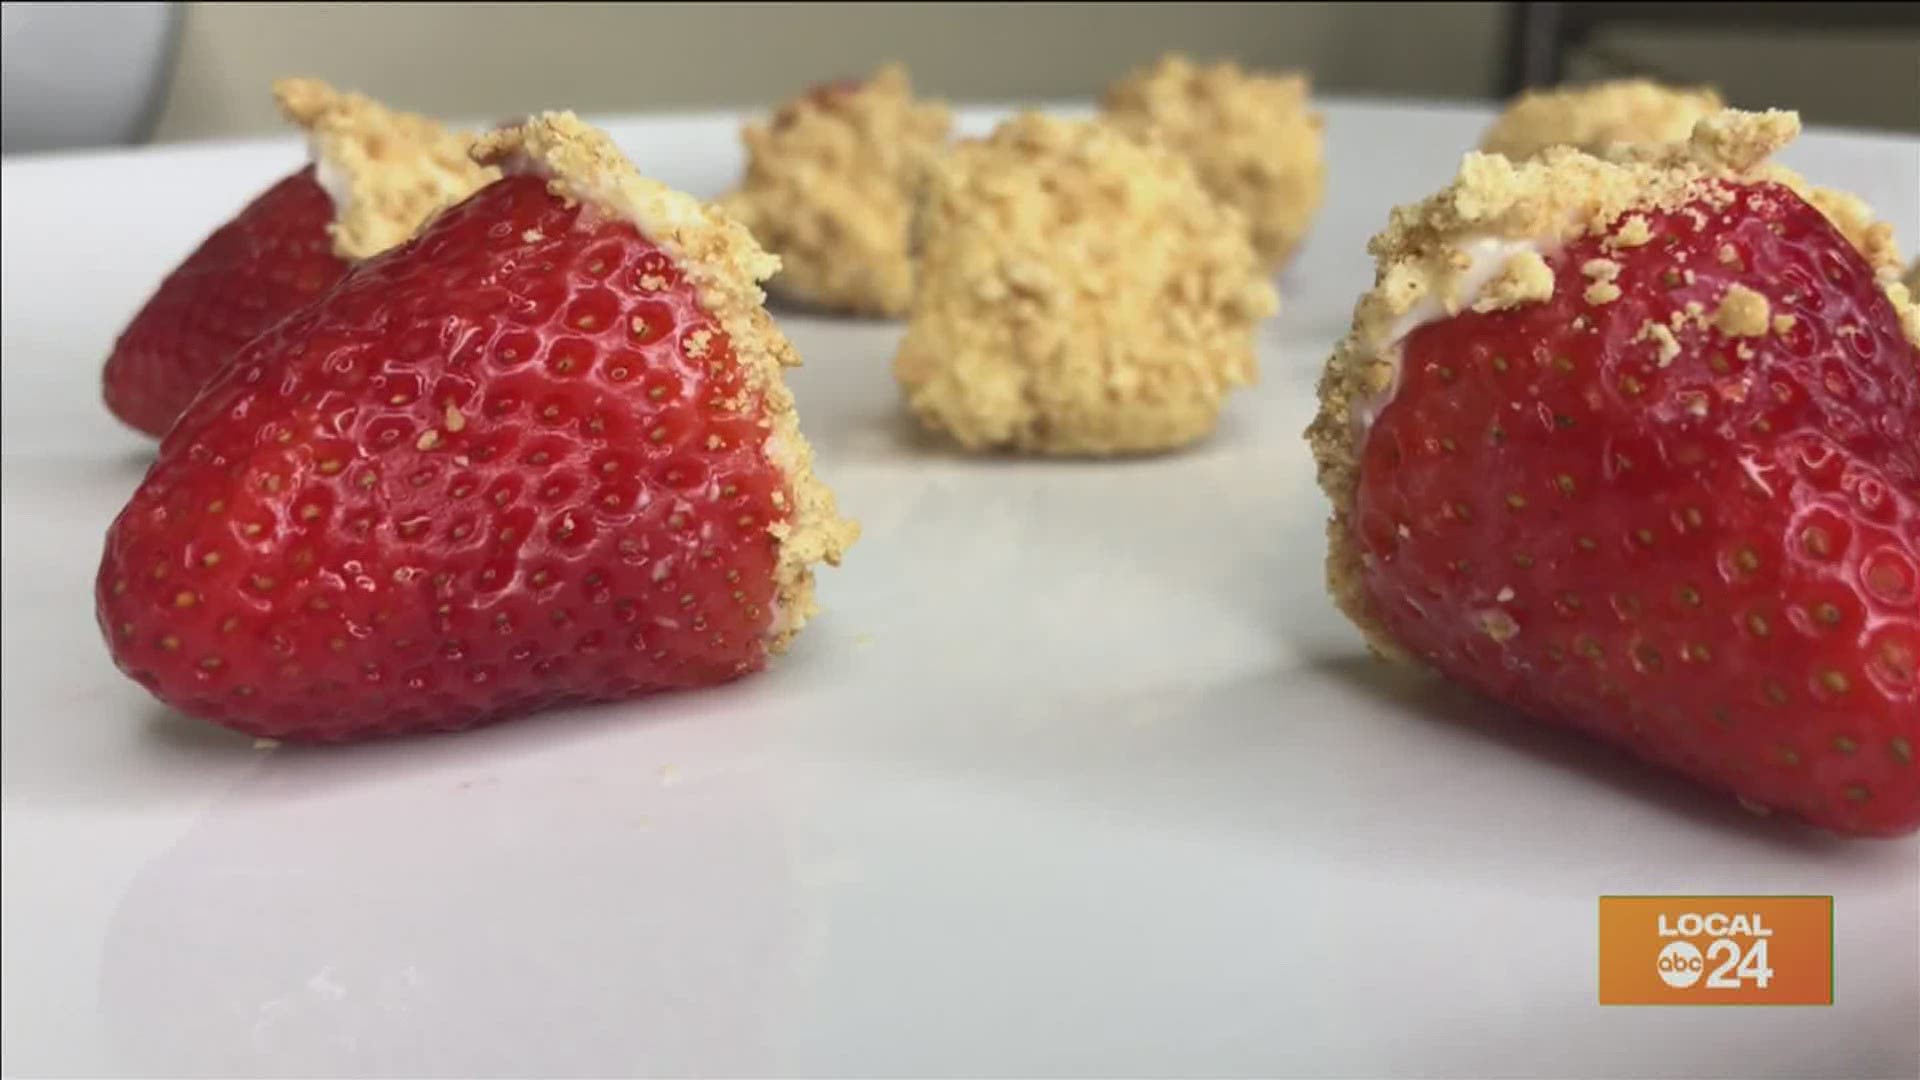 Whether you have a sweet tooth or a not-so-sweet tooth, check out this easy recipe for fresh strawberry cheesecake bites! Starring Sydney Neely on "The Shortcut!" :)